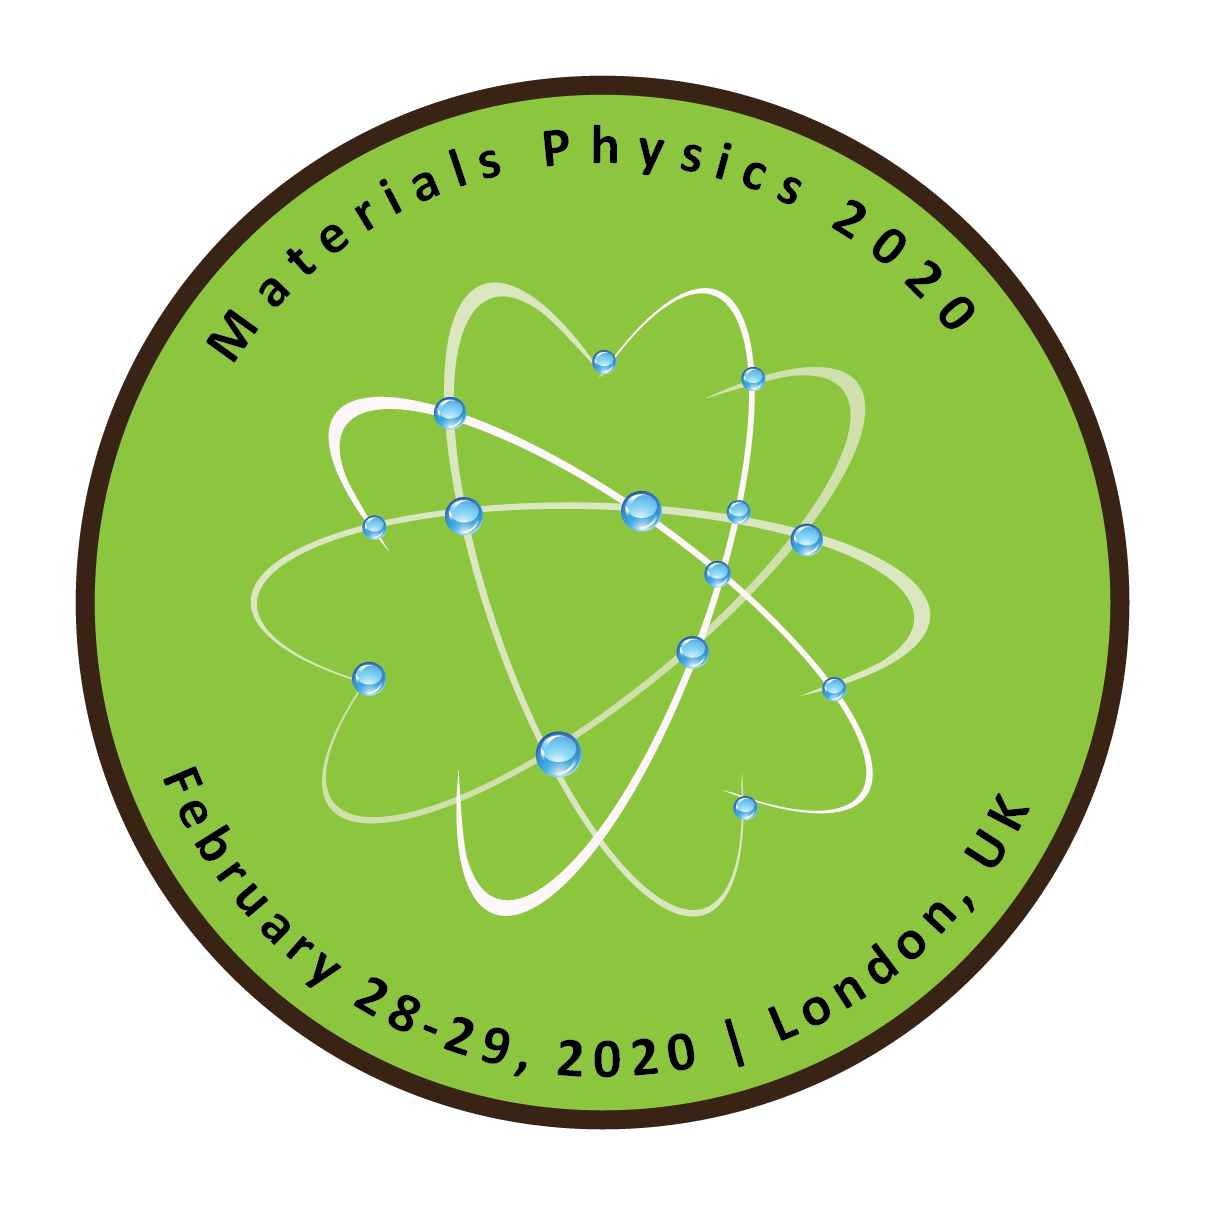 3rd  International Conference on Materials Physics and Materials Science, London, United Kingdom